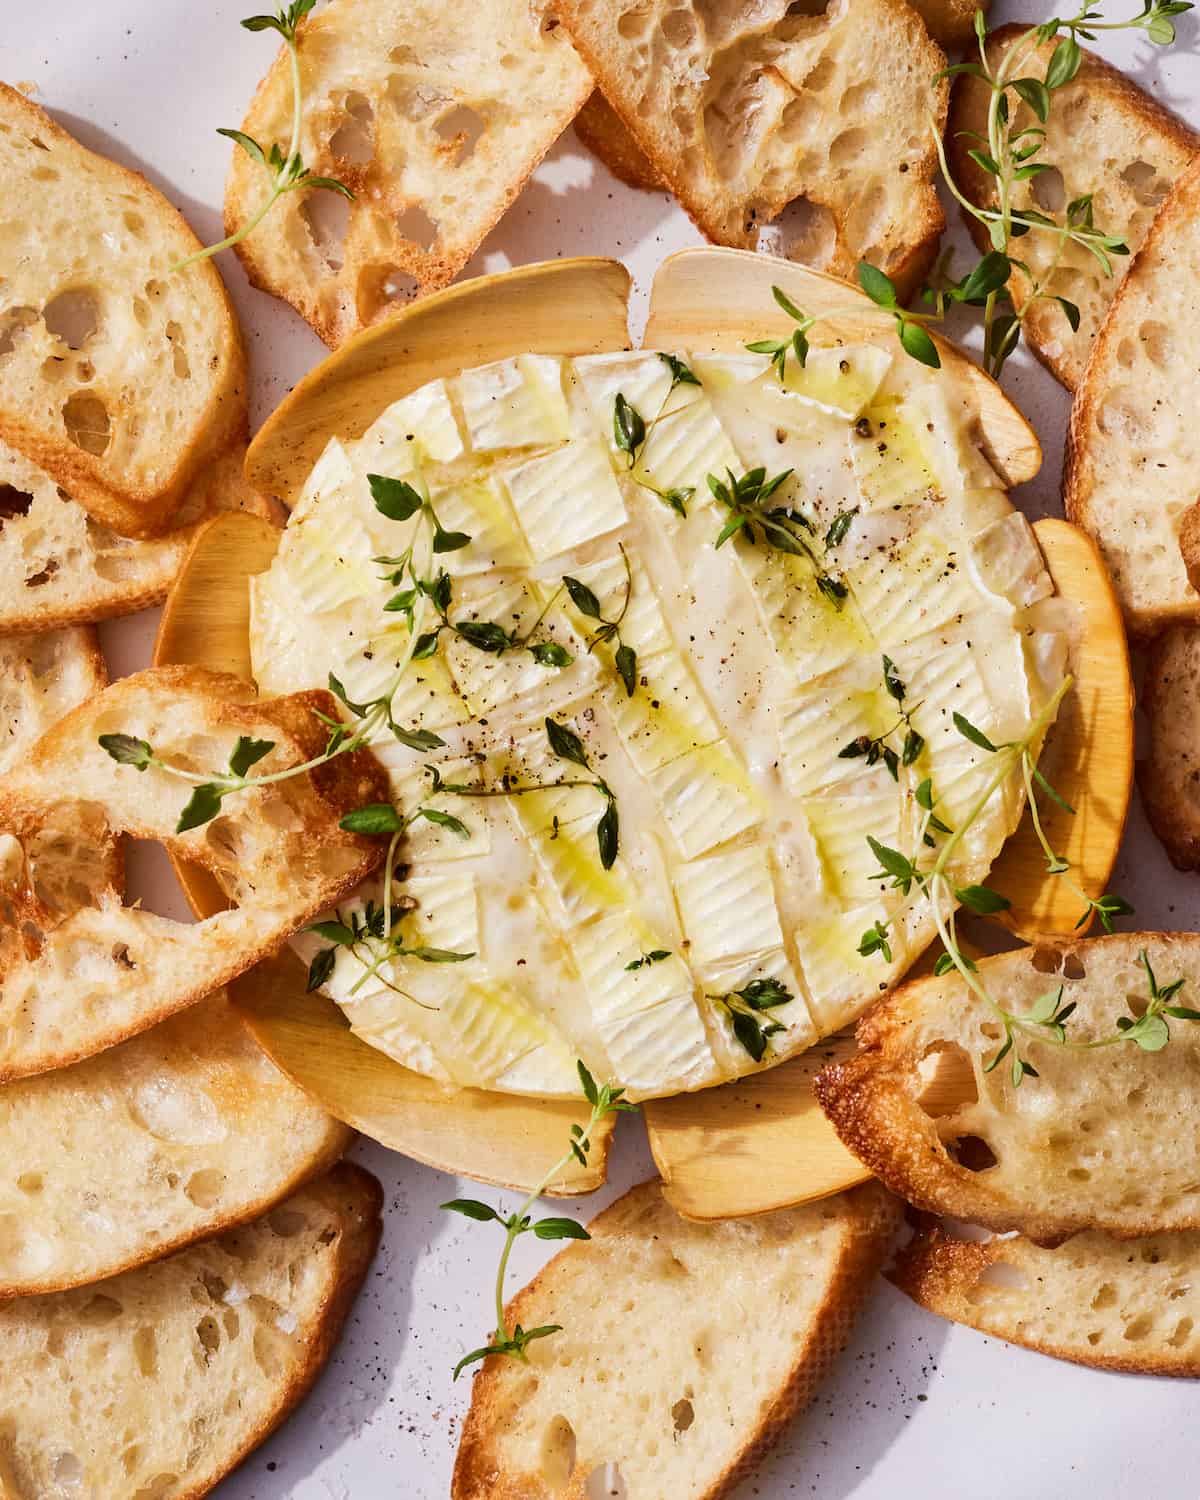 Baked Camembert topped with thyme and olive oil and the top rind scored, surrounded by toasted crostinis.